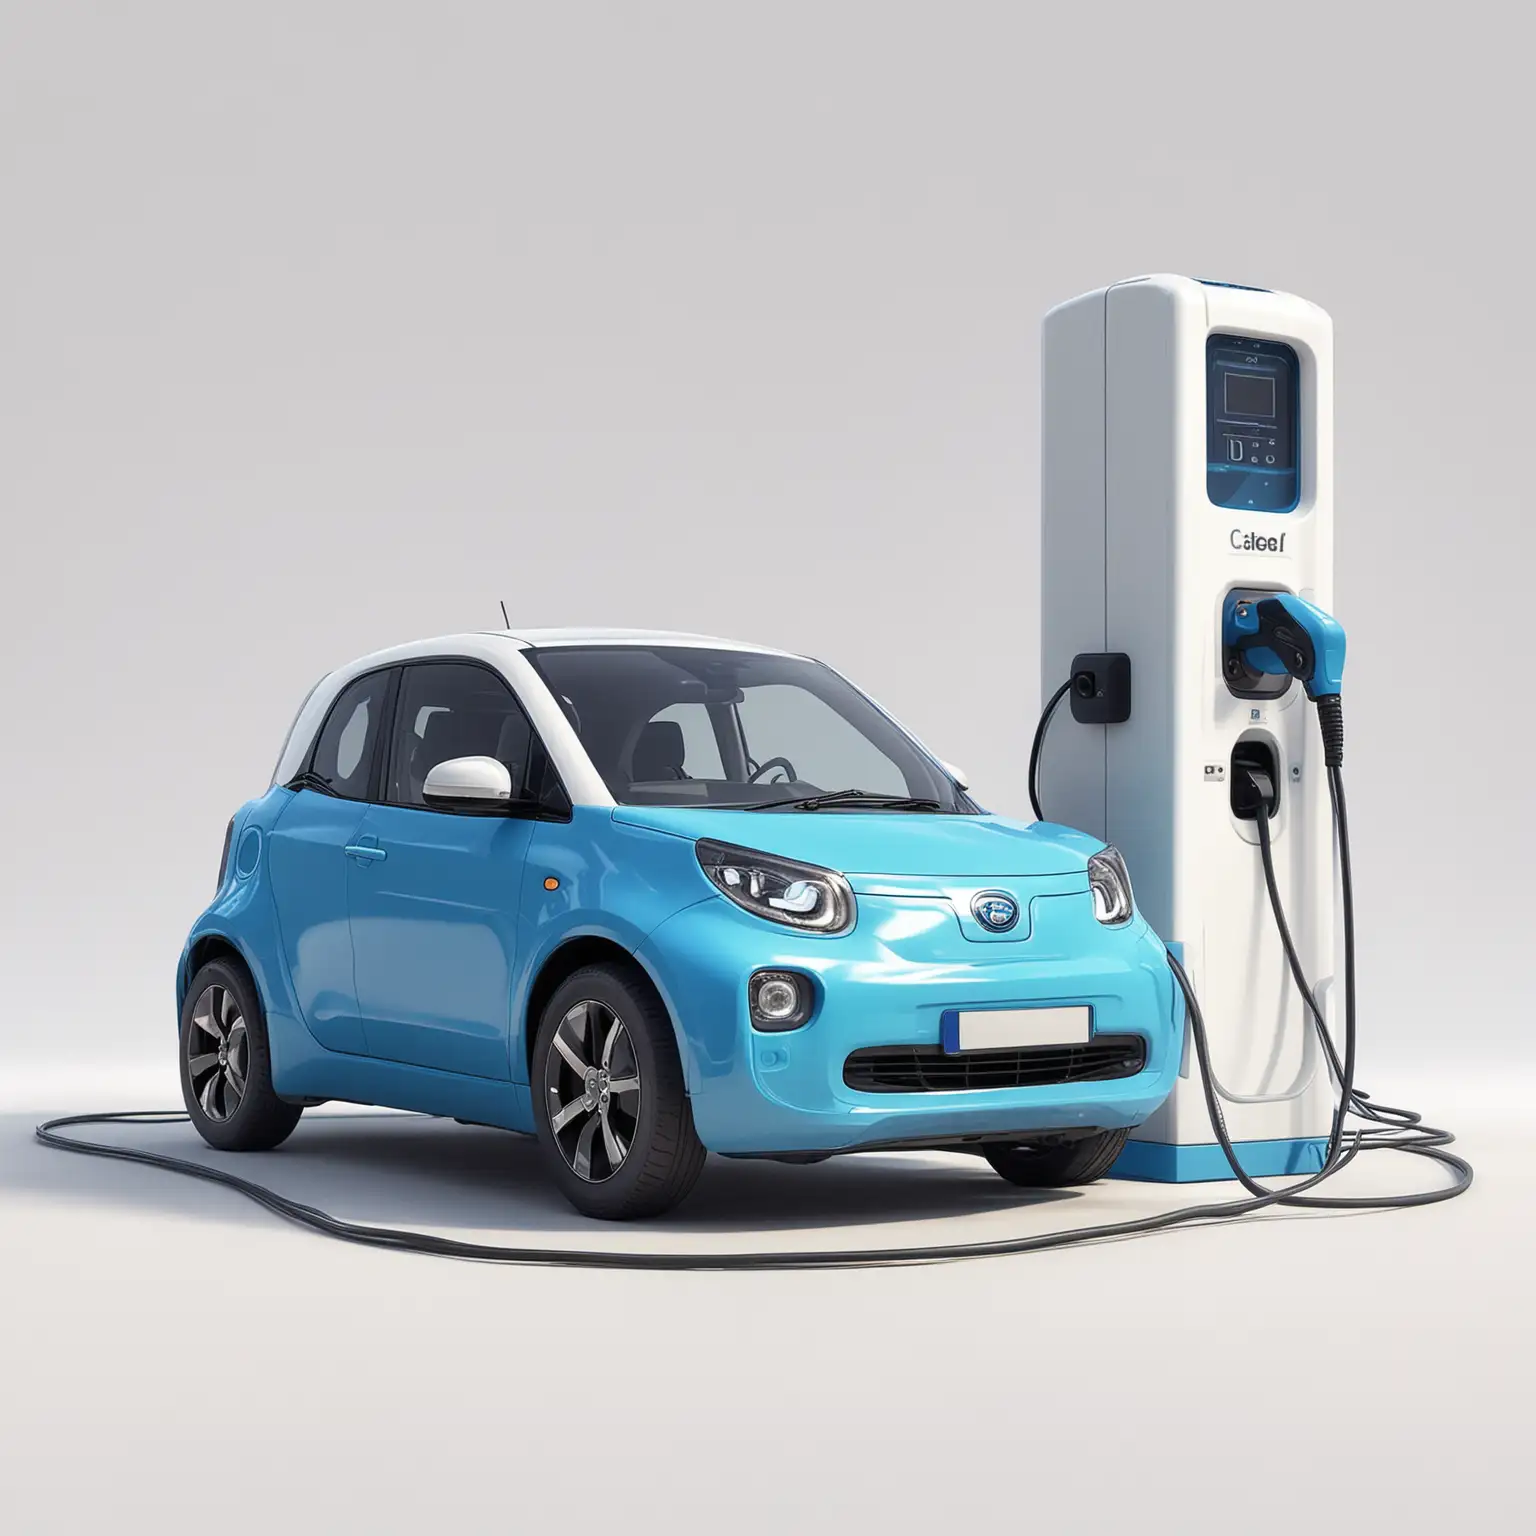 Create an image of a blue electrical vehicle charging at a station. Colourful pixar style, white background